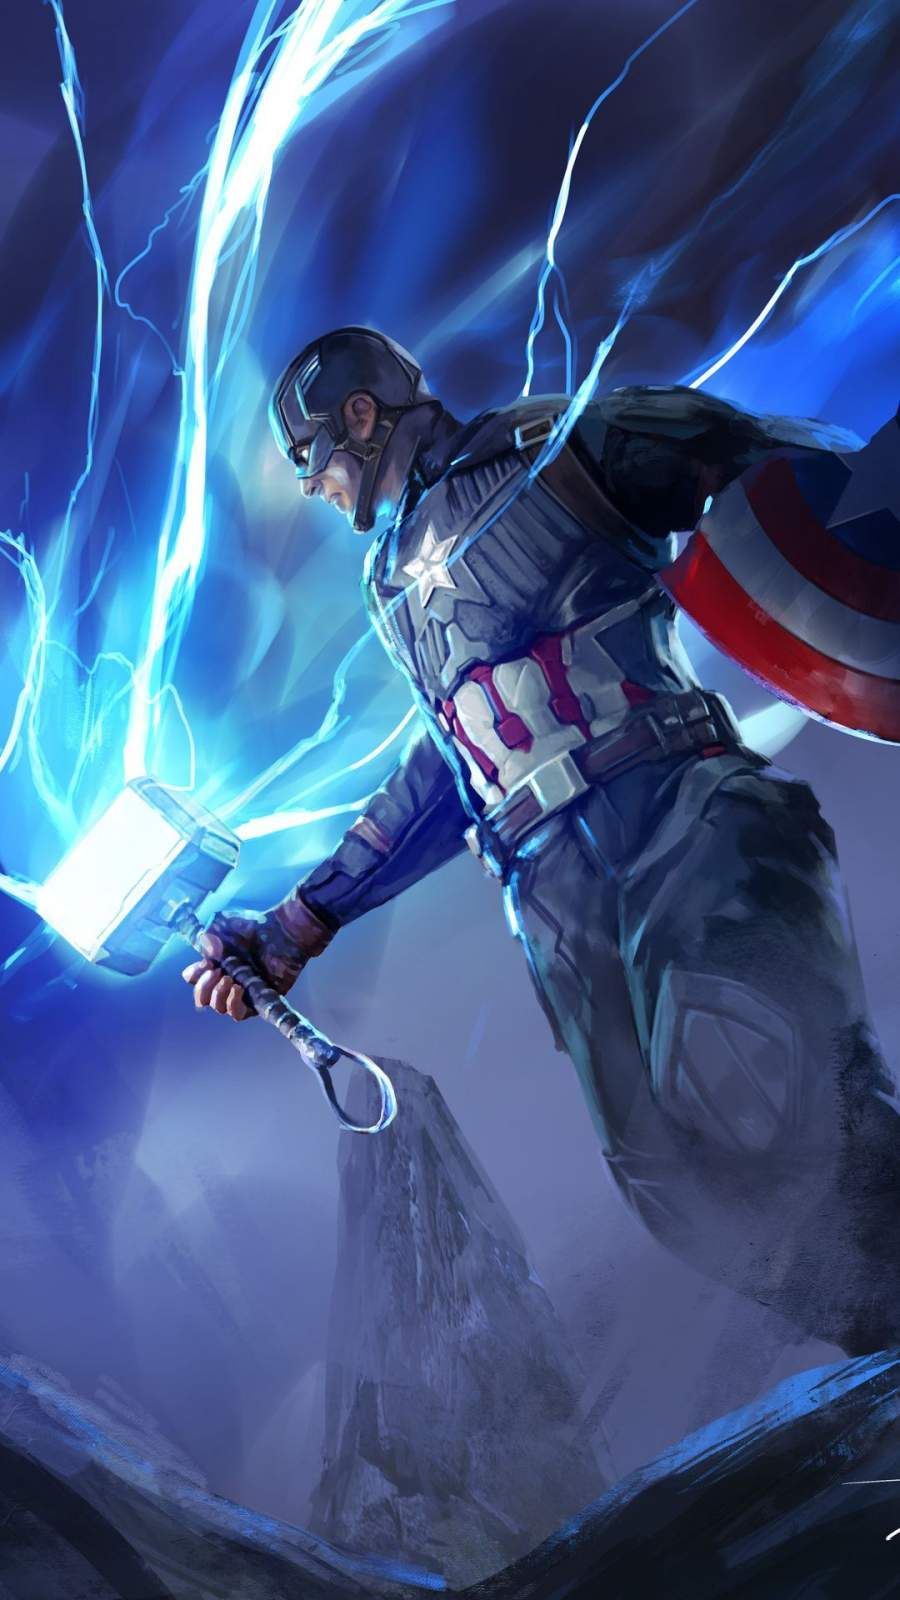 Captain America With Thor Hammer Attack IPhone Wallpaper. Marvel